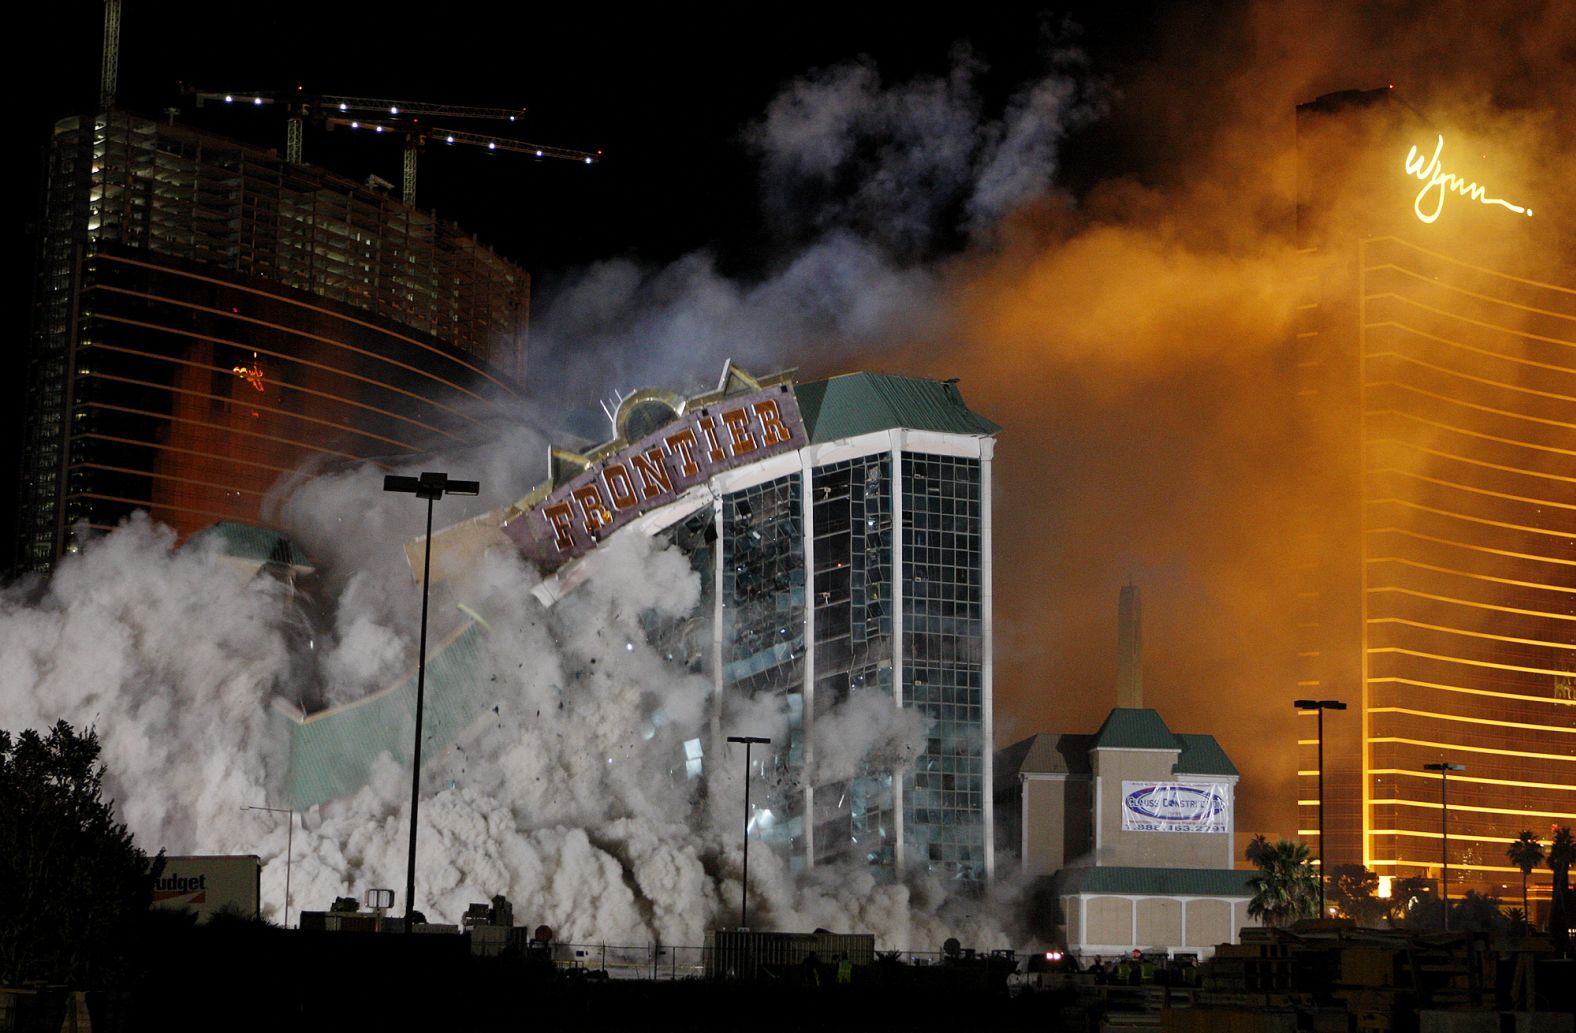 The New Frontier, one of the oldest hotels and casinos on the Strip, is imploded in 2007. Behind it are two of the newer Wynn resorts.